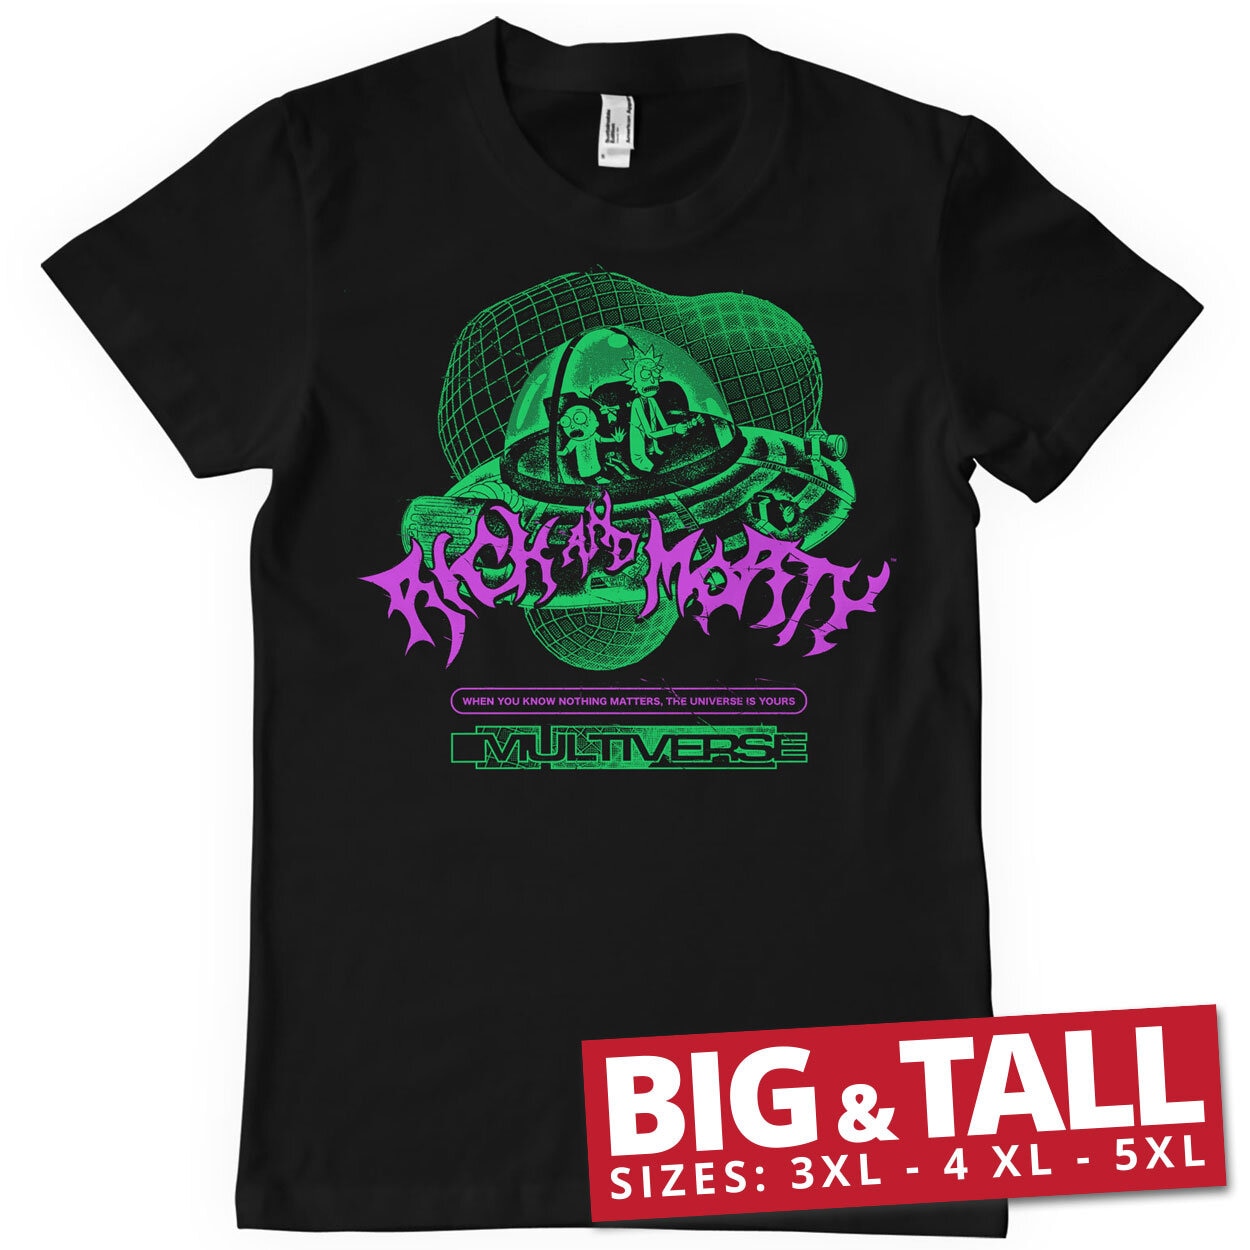 The Space Is Yours Big & Tall T-Shirt